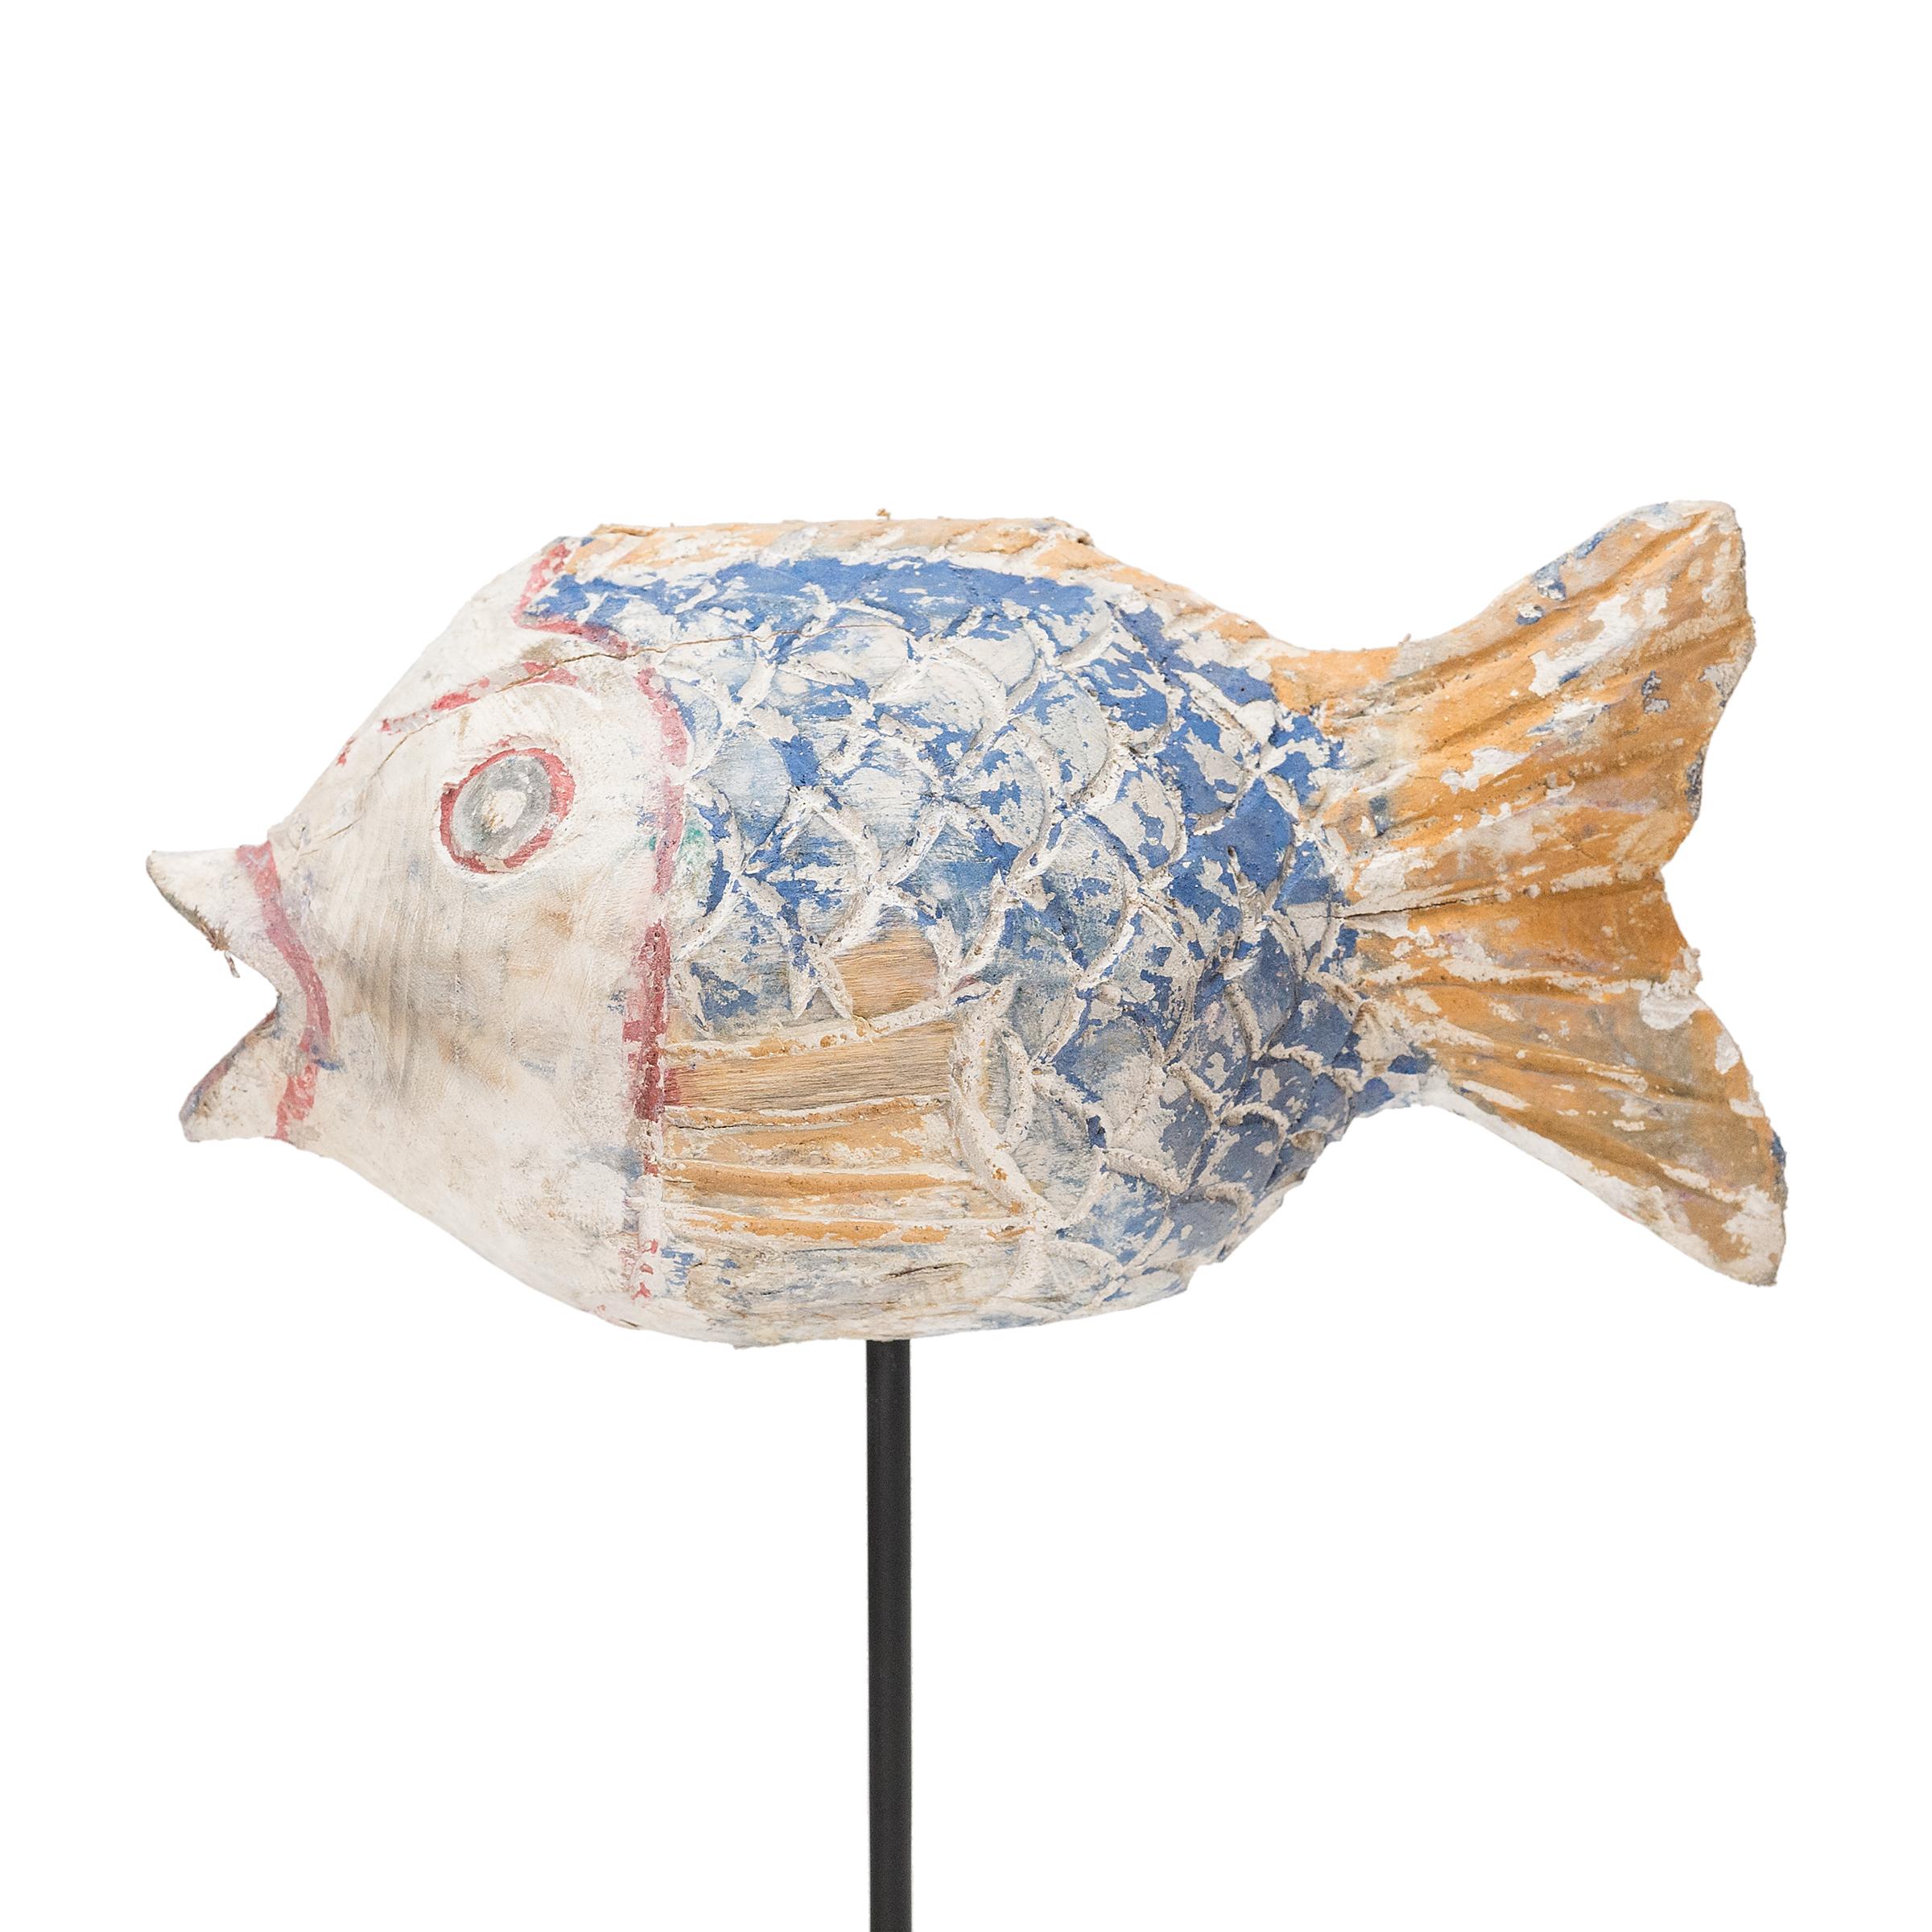 Hand-crafted from reclaimed wood, this artisanal koi sculpture is a traditional symbol of harmony and luck. For Buddhists, such a fish represents a freedom from all restraints. And because fish are reputed to swim in pairs, two fish paired together